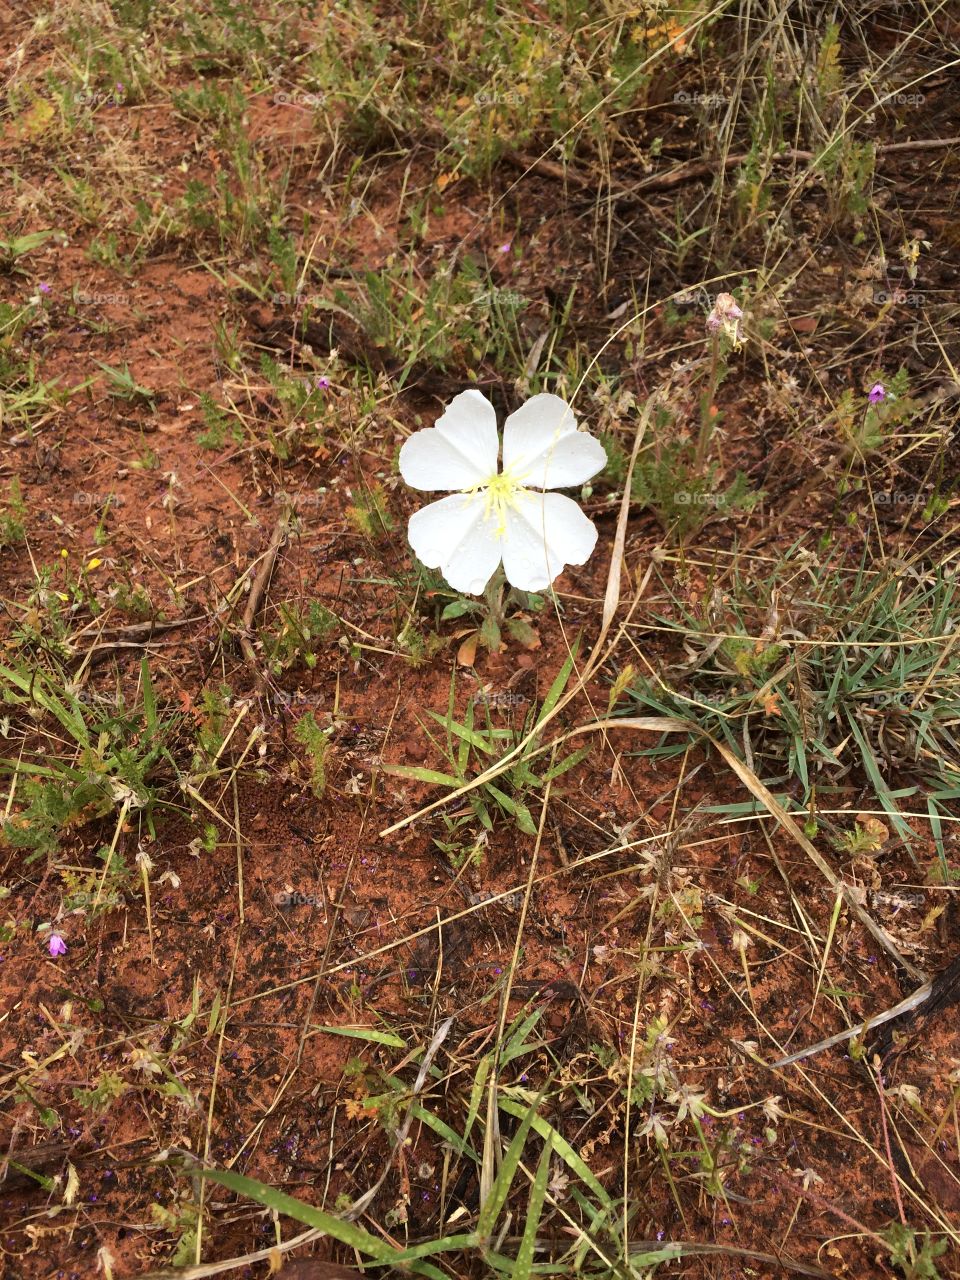 Lone Flower. Survival of the fittest